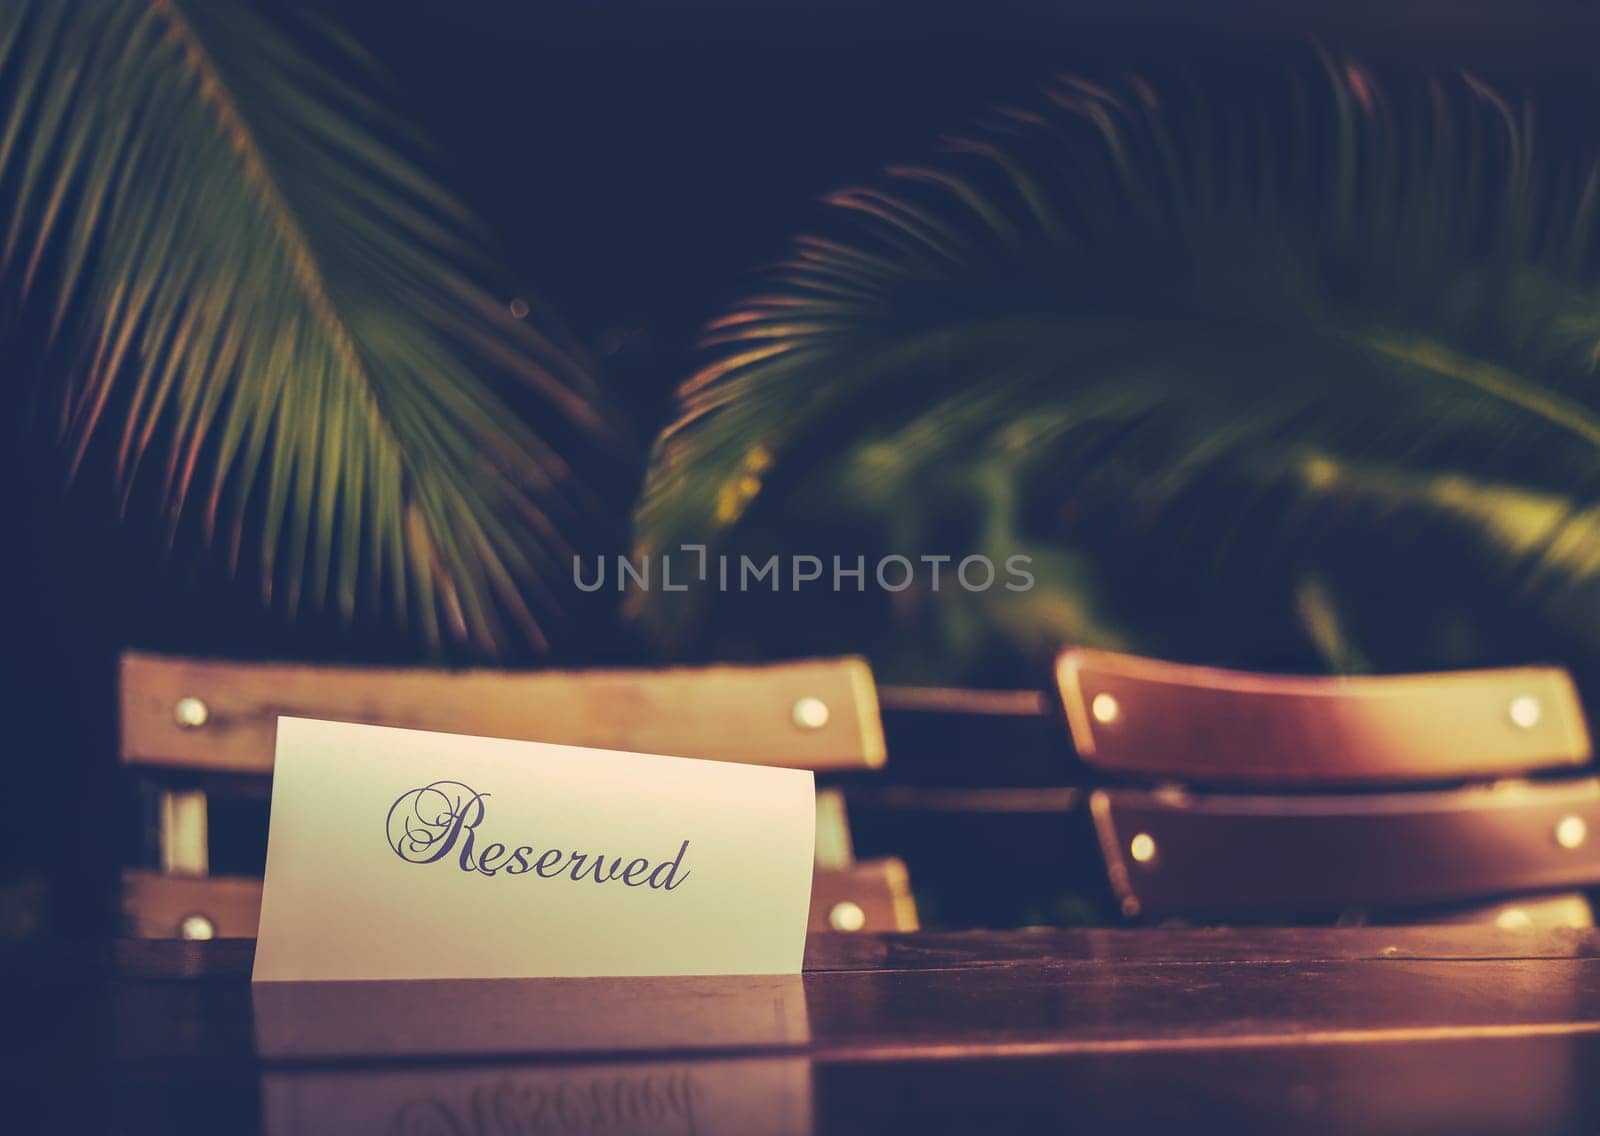 A Reserved Table At A Restaurant In A Tropical Resort Hotel